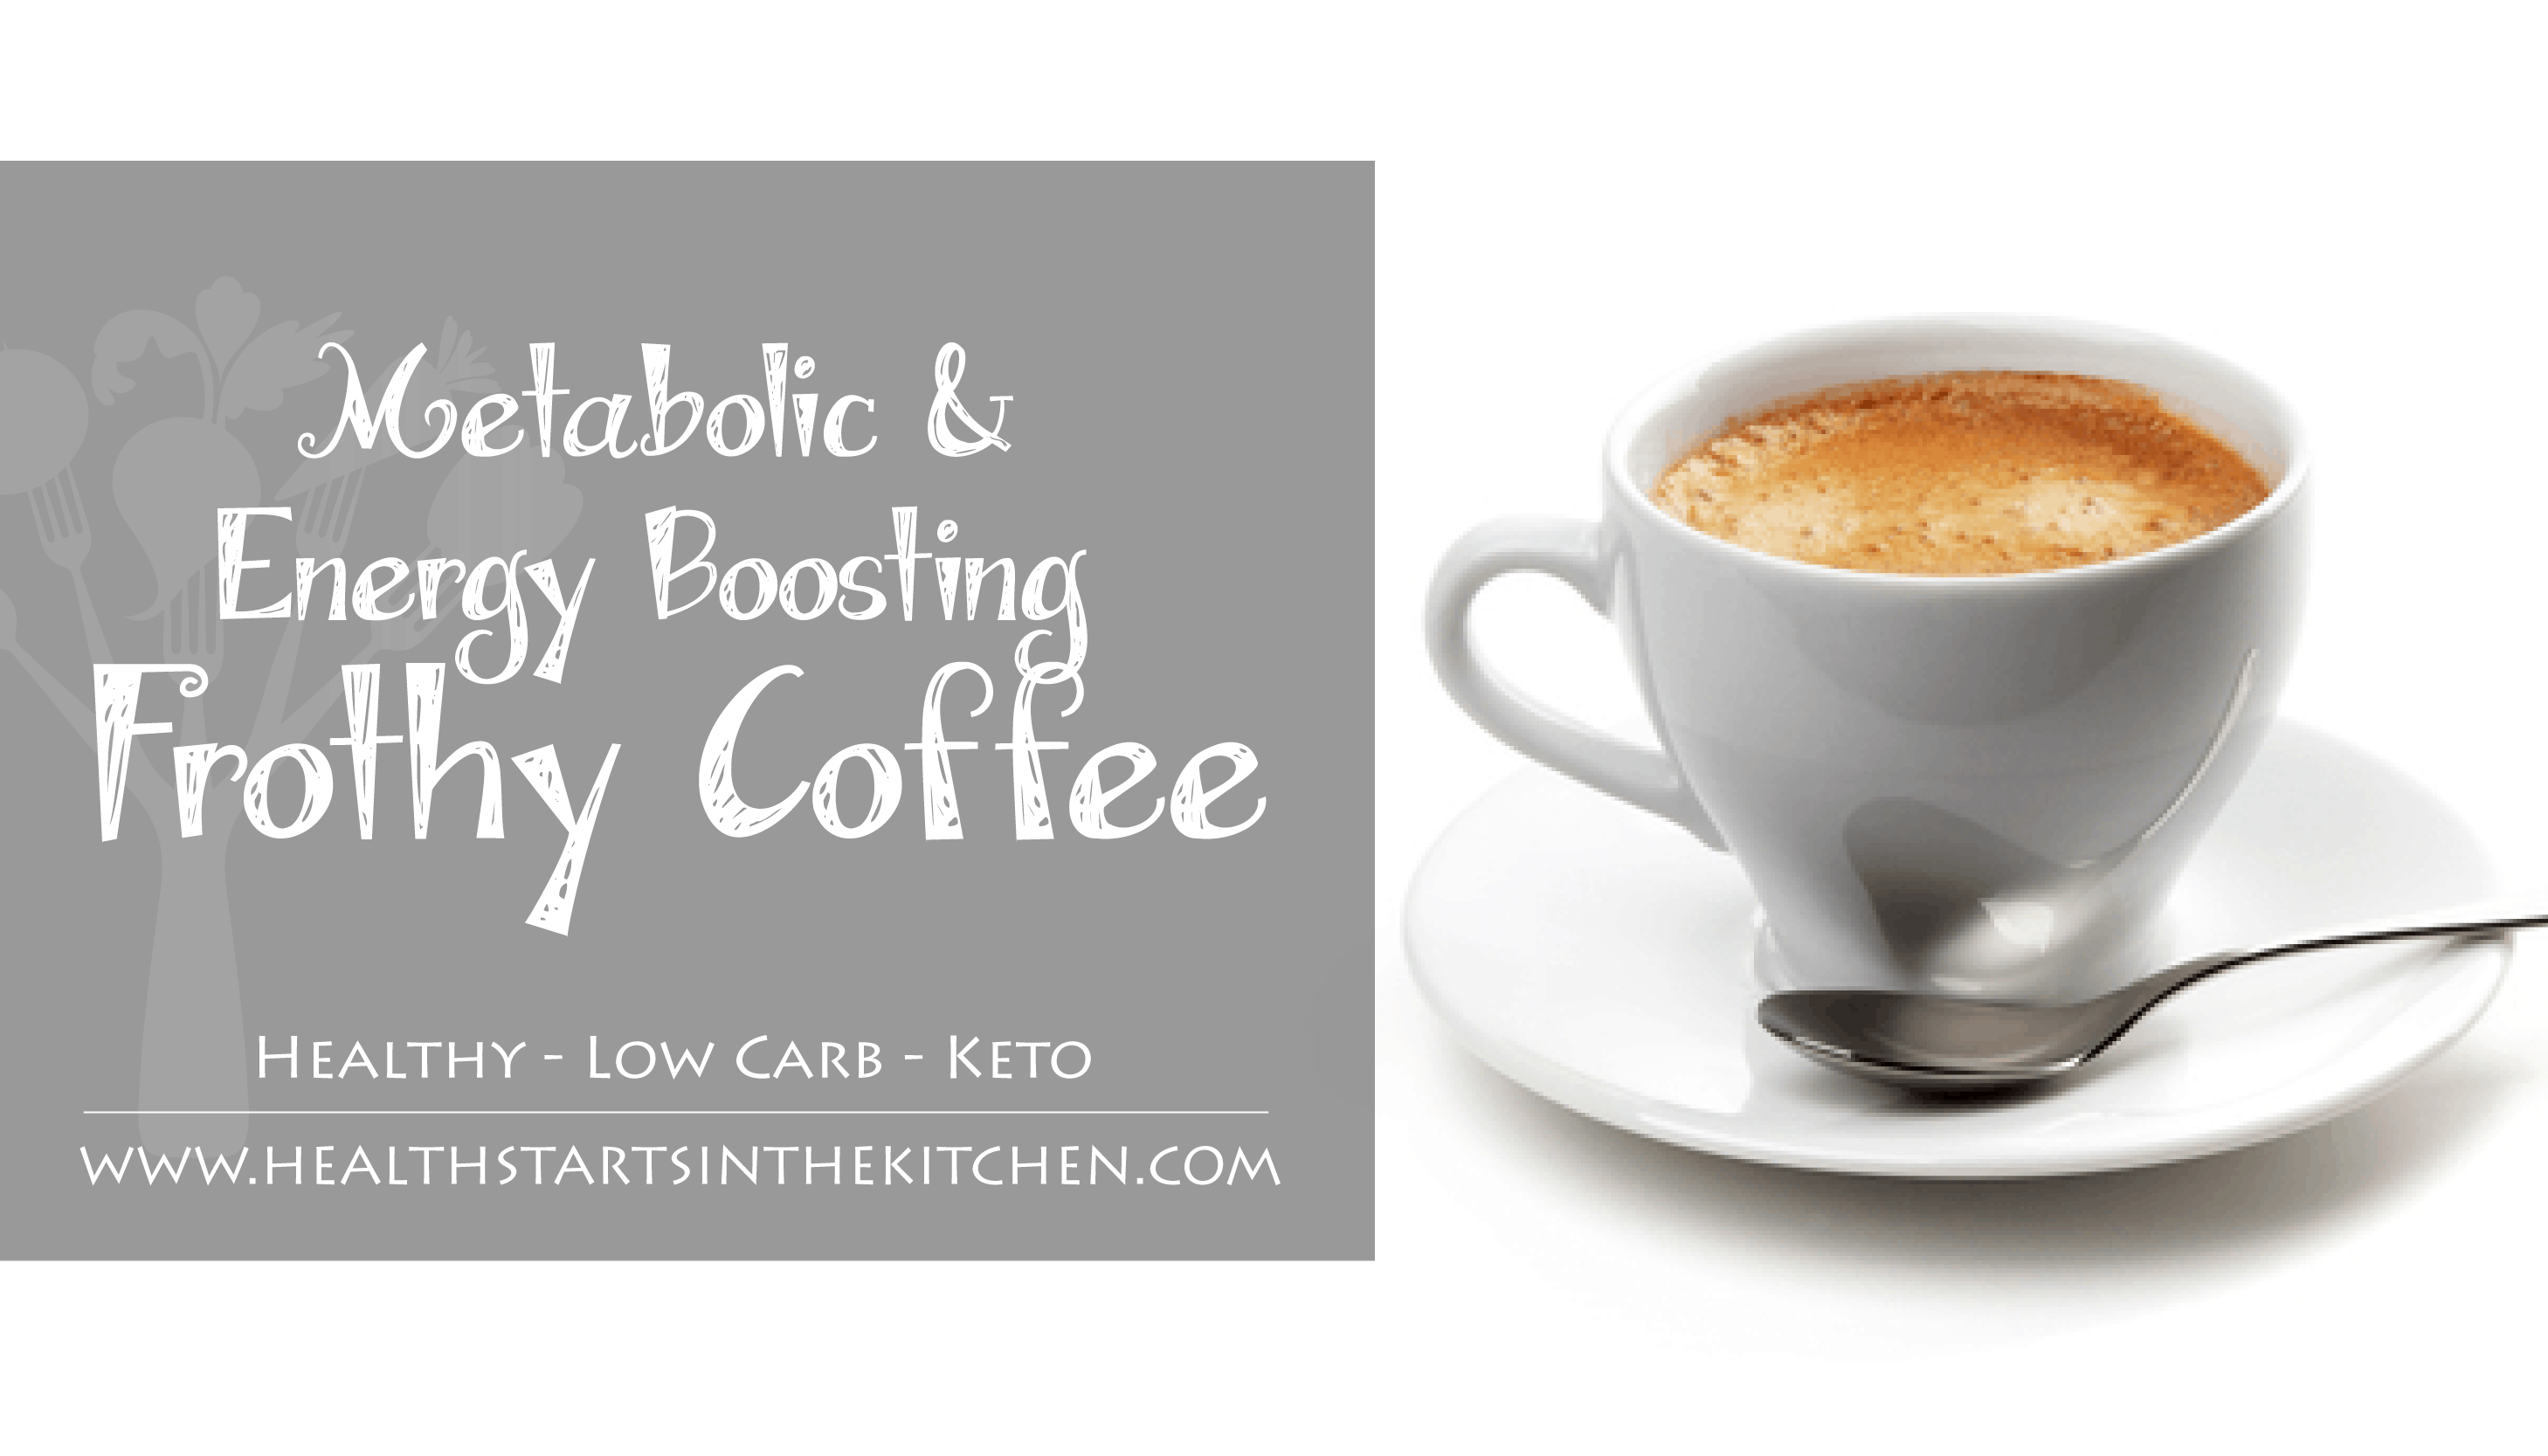 Metabolic & Energy Boosting Frothy Coffee